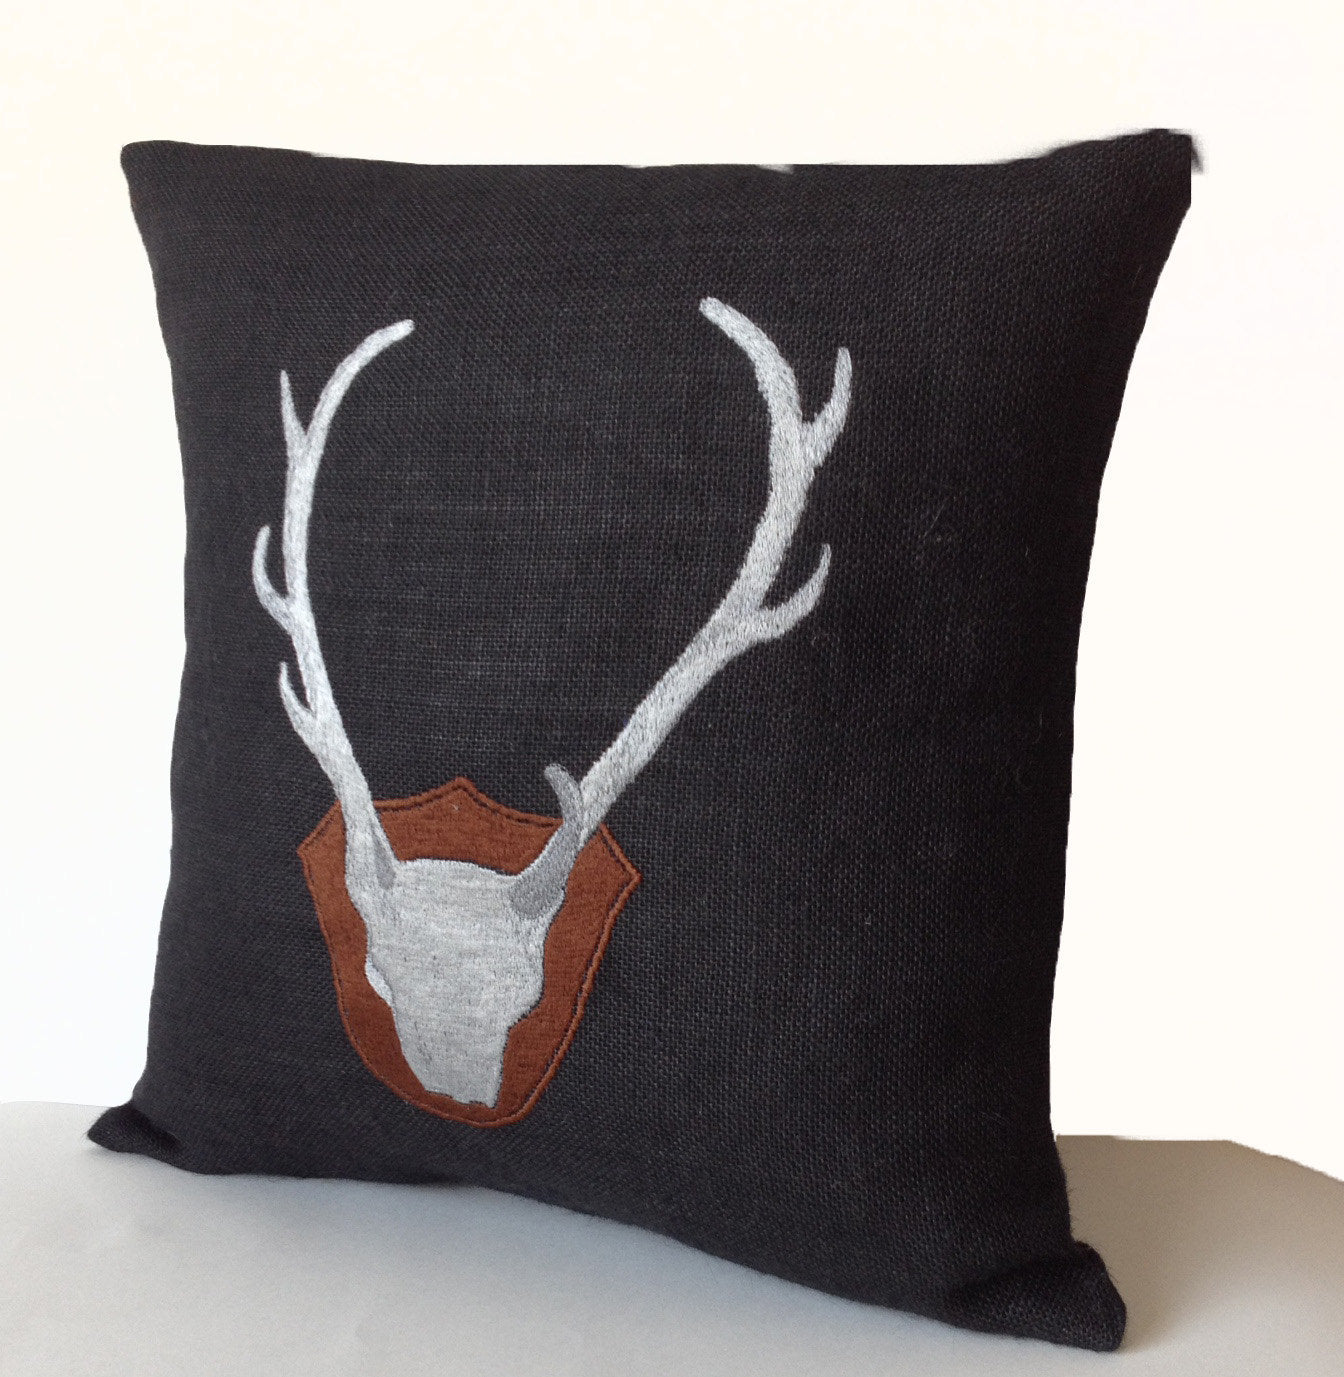 Amore Beaute Deer Pillow Cover, Deer Antler Pillow In Black Burlap With Exquisitely Embroidered Deer Cushion